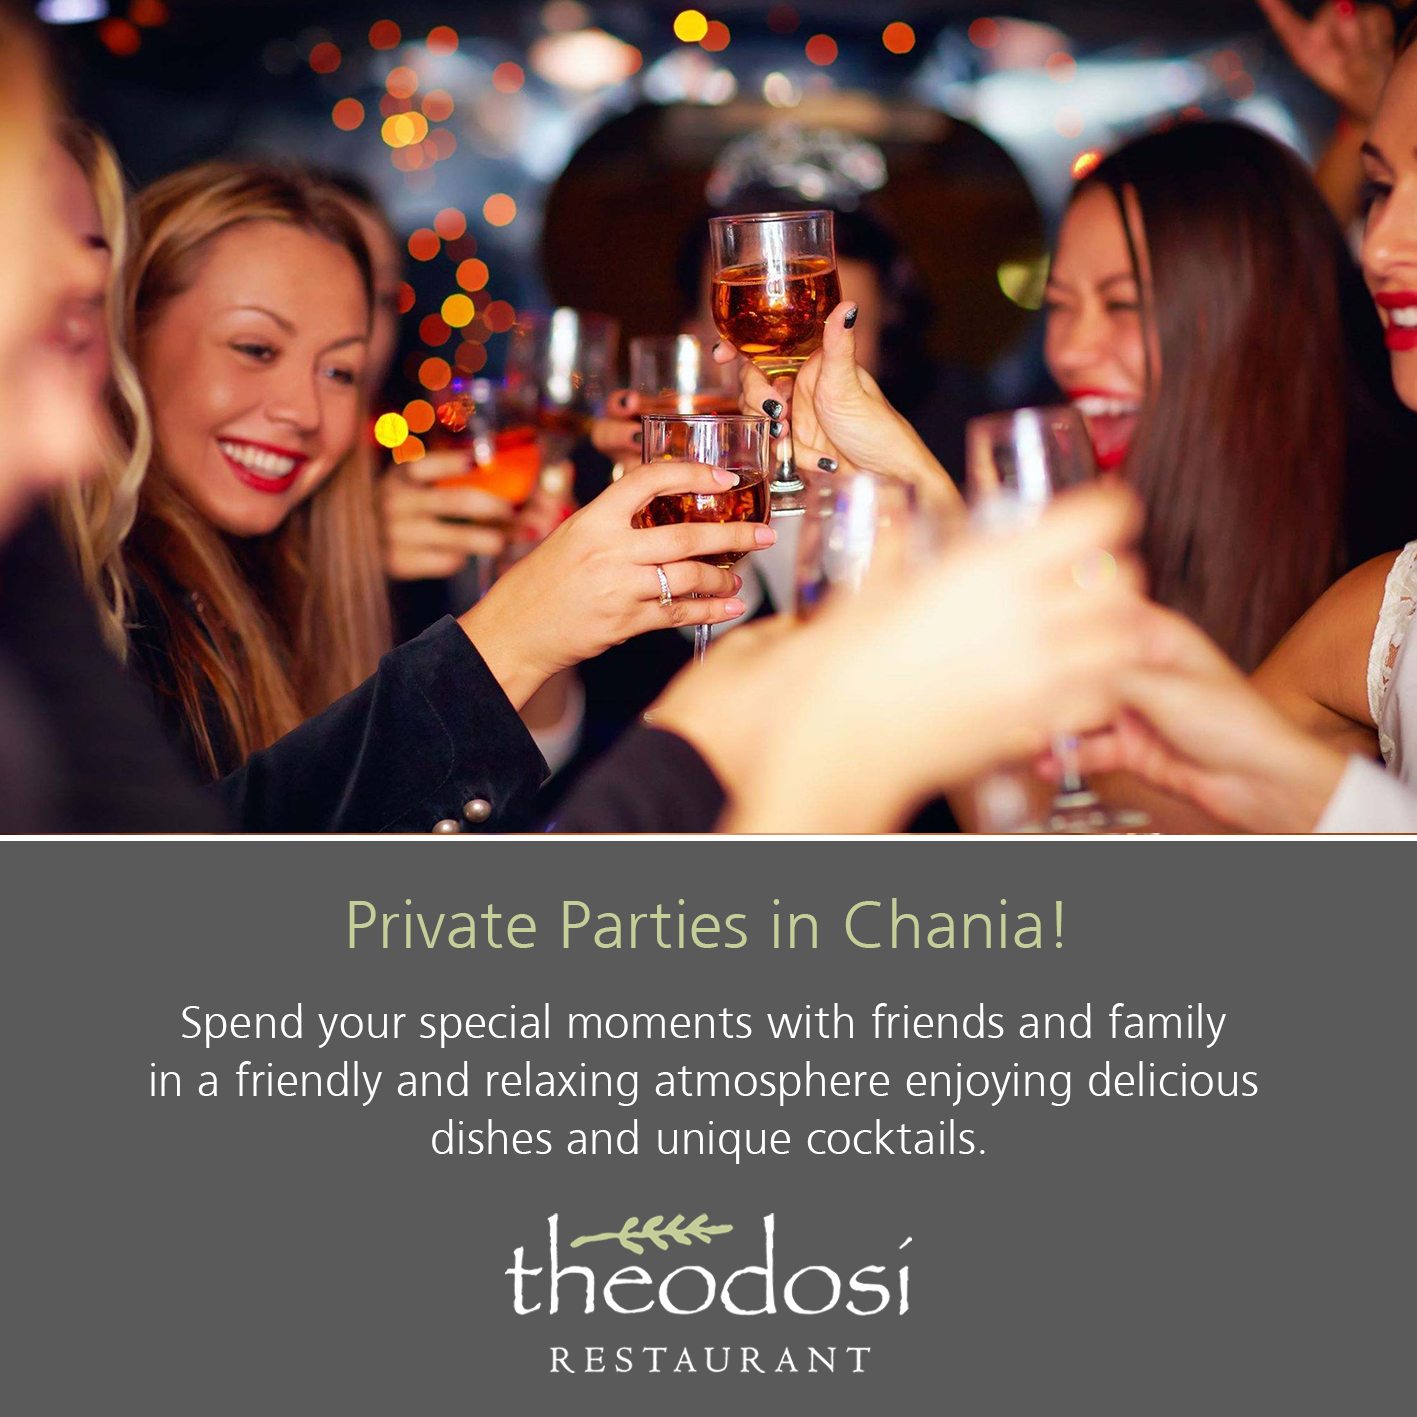 (English) Private Parties in Chania!